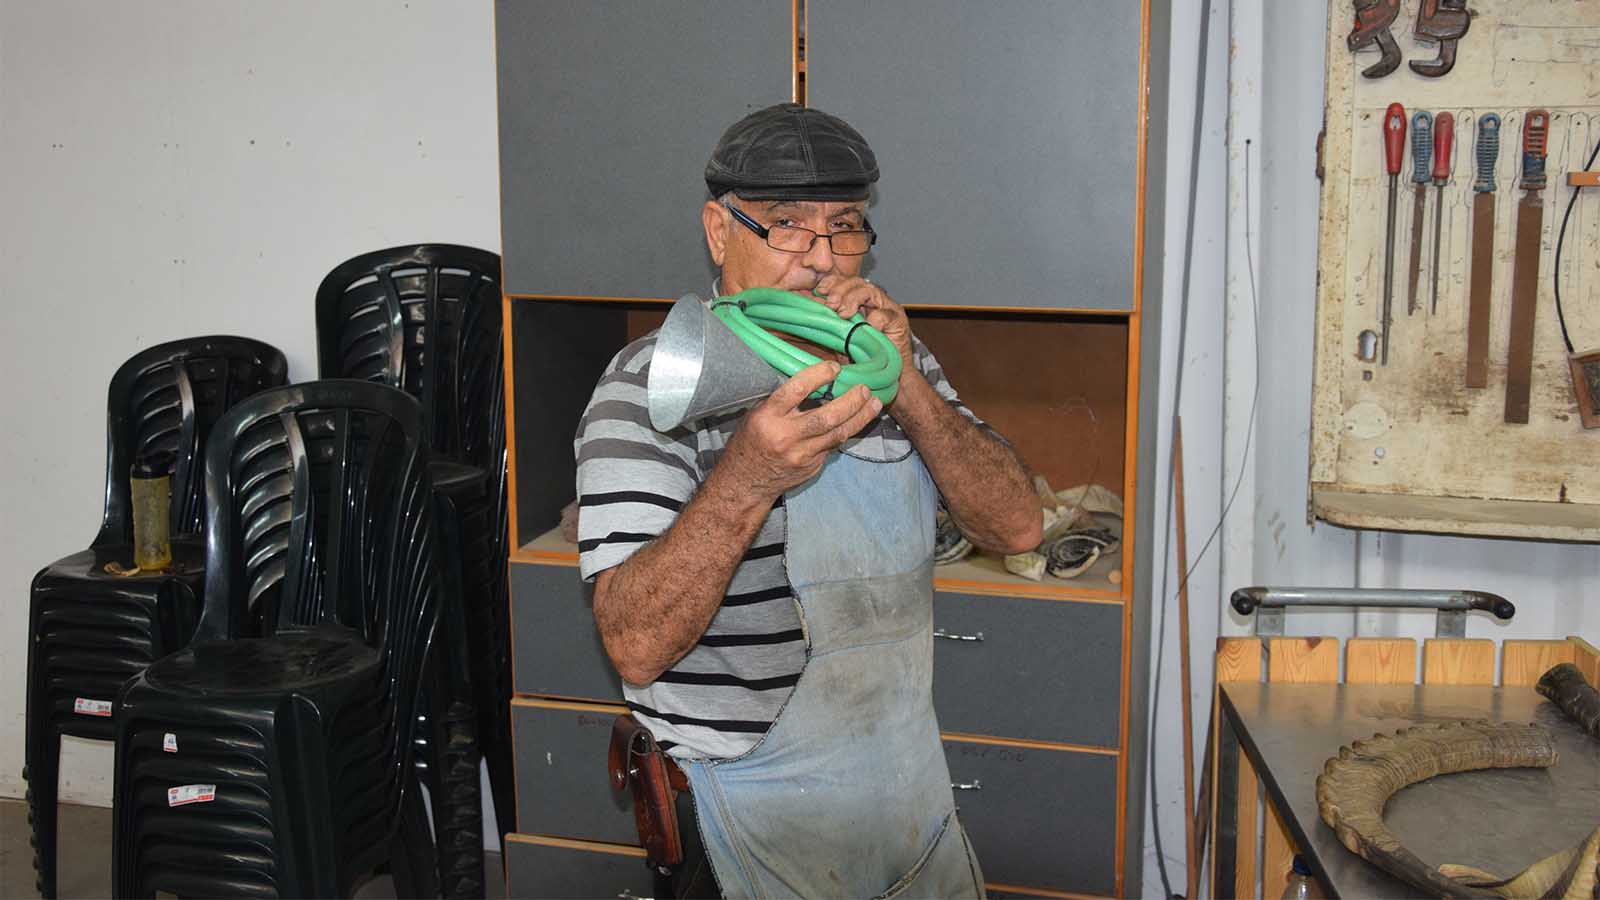 Shimon Keinan with a model of his first shofar made from hosepipe and a gasoline funnel. credit: Yael Elnatan